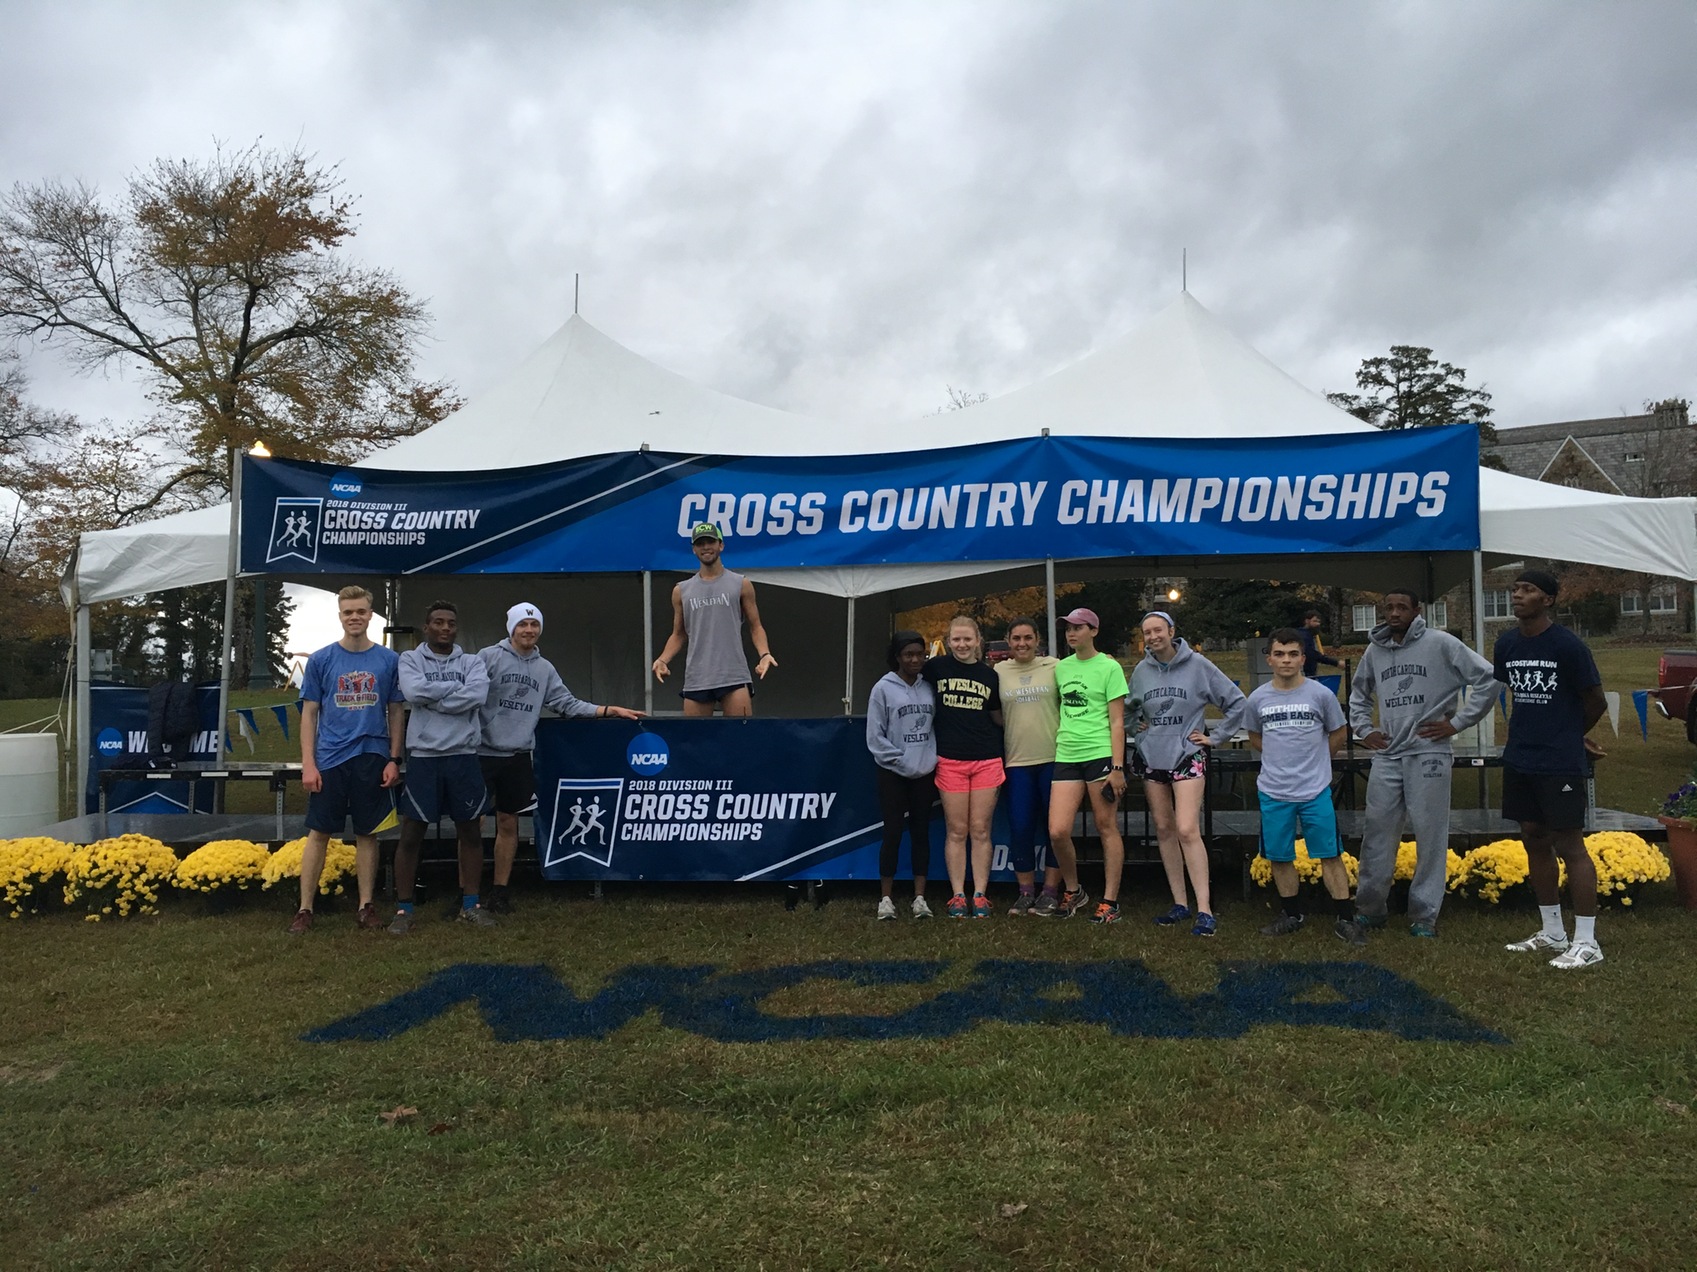 NC Wesleyan to Host USA South Cross Country Championships in 2019